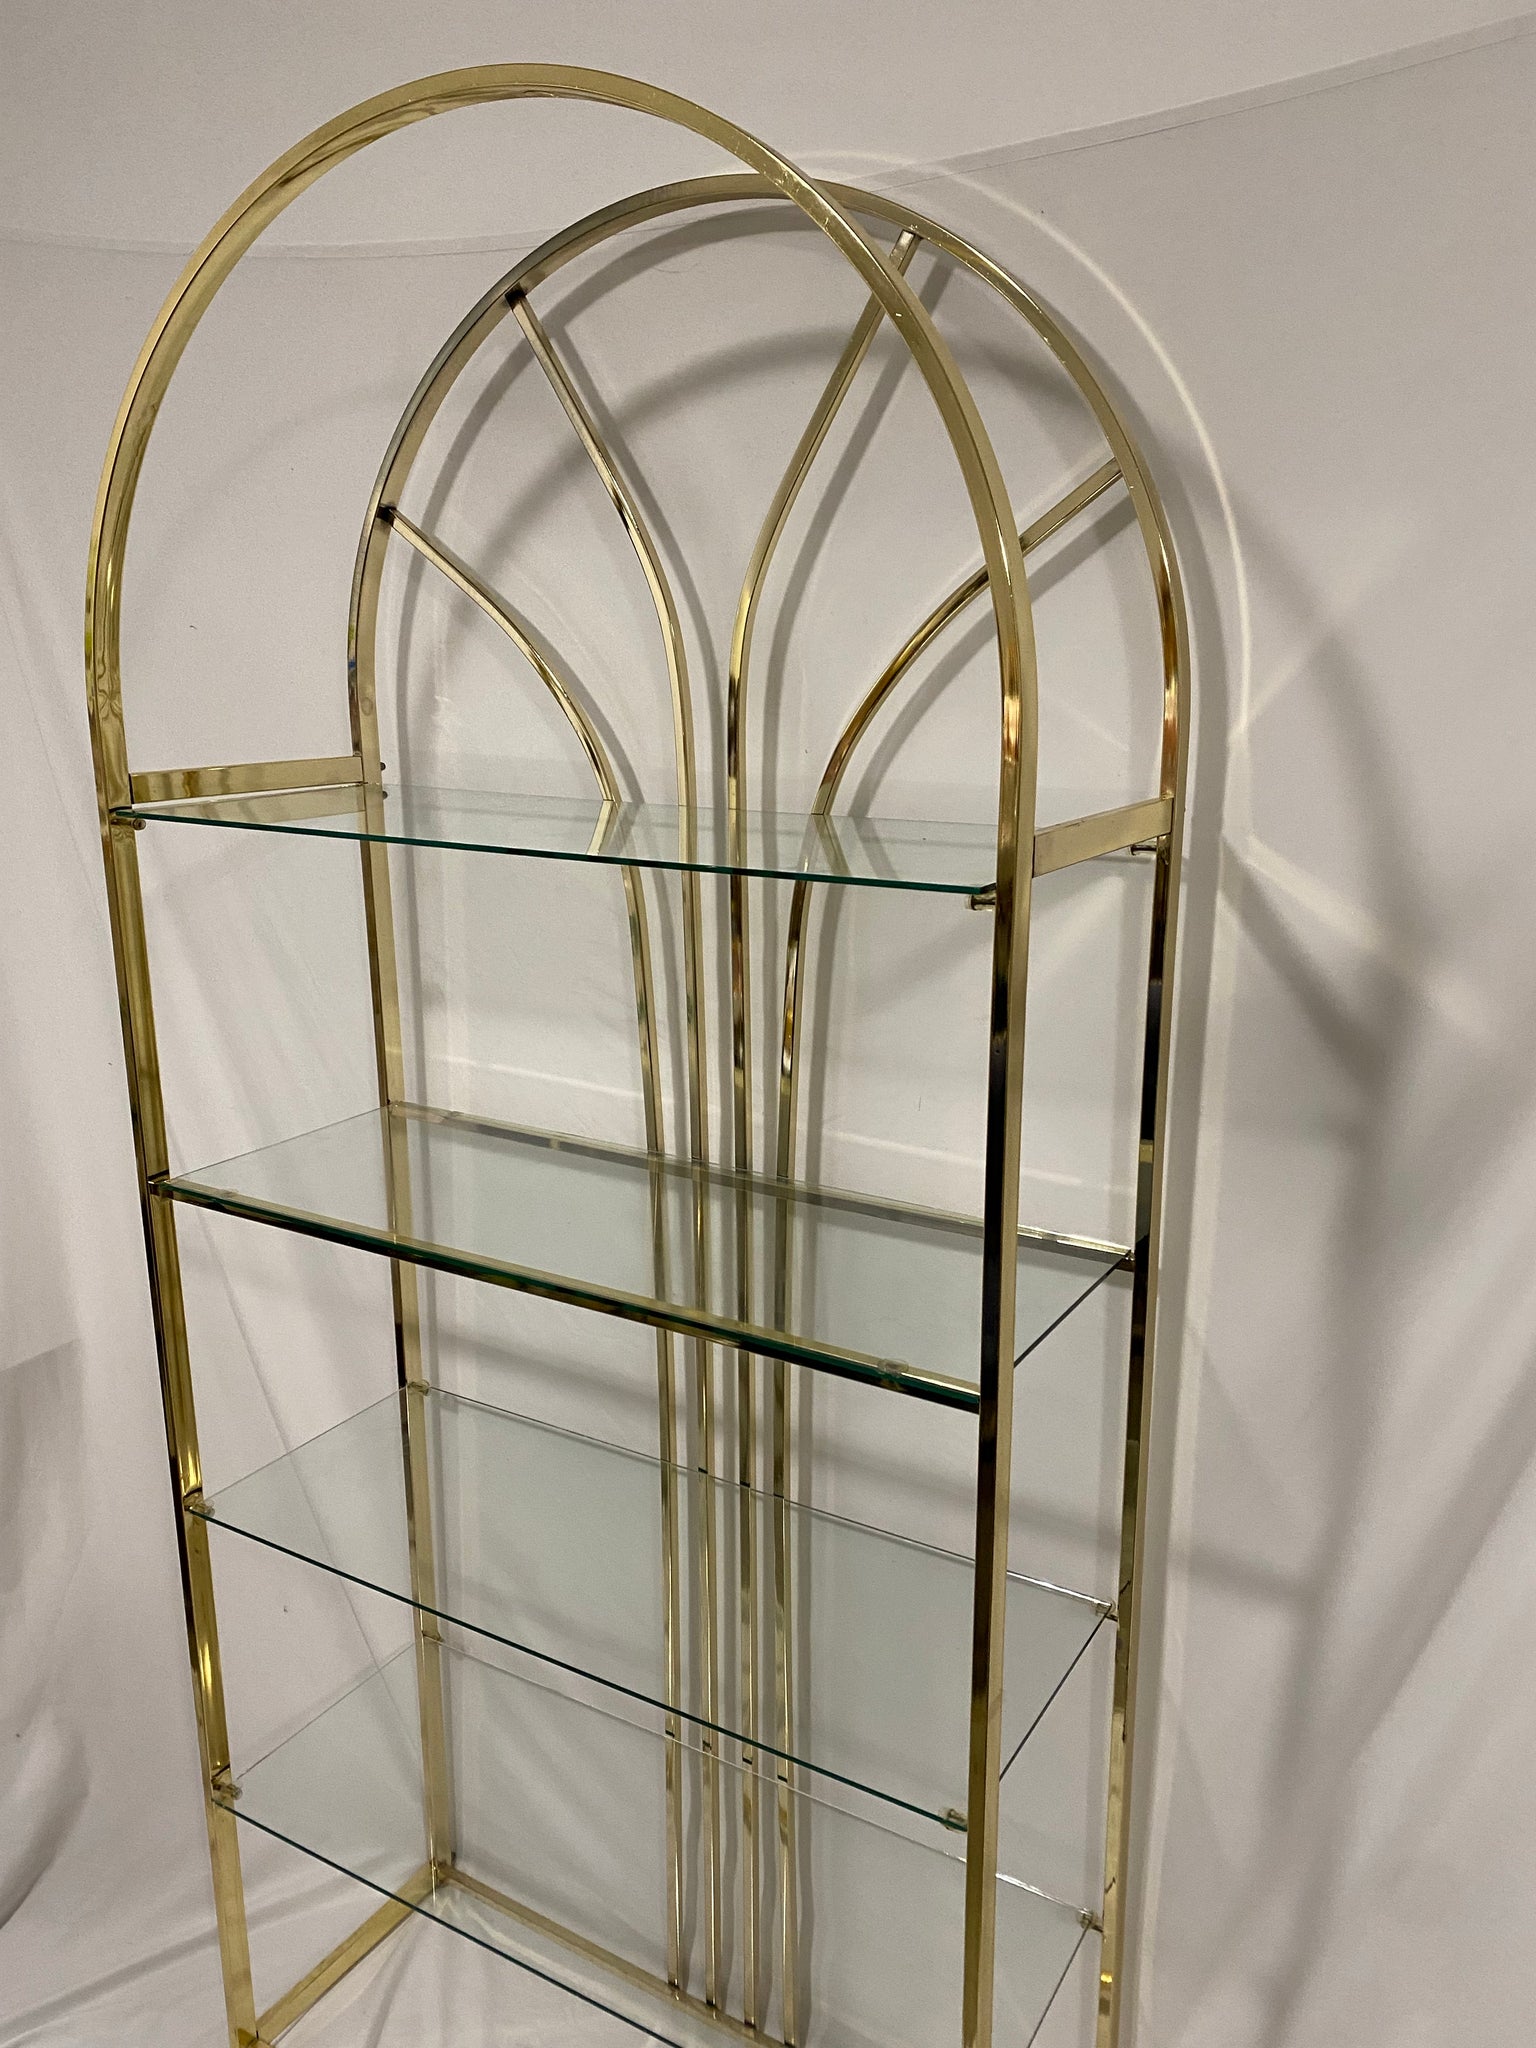 Hollywood Regency arched brass étagère – Turquoise's Treasures